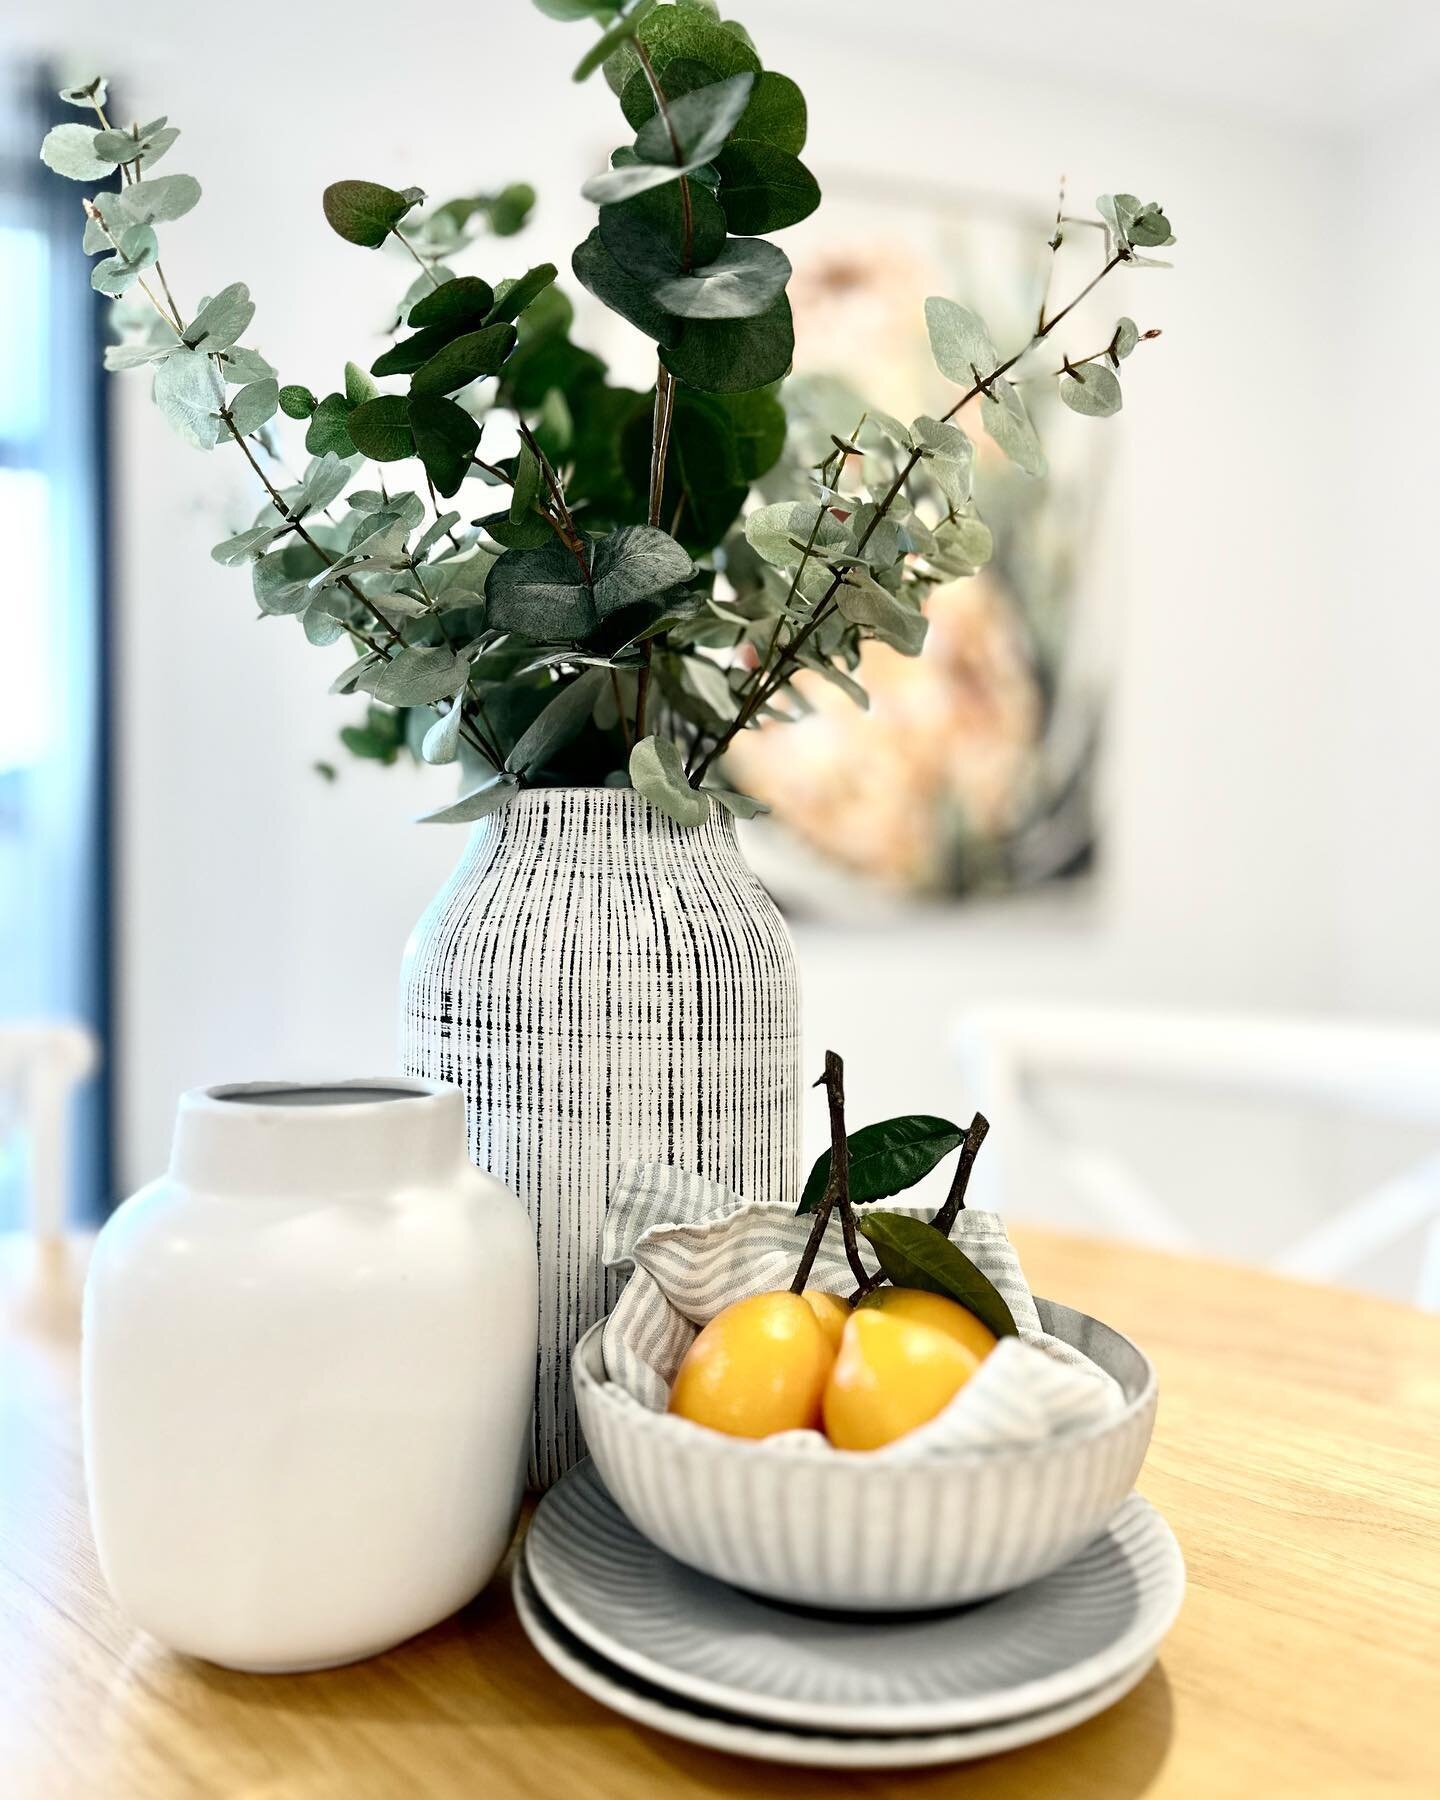 💡STYLING 101 💡

When creating vignettes of d&eacute;cor accessories try using a combination of height, shape and texture to create interest and atmosphere ⭐️

#propertystaging #propertystyling #interiorstylingaustralia  #sydneypropertystyling #aust